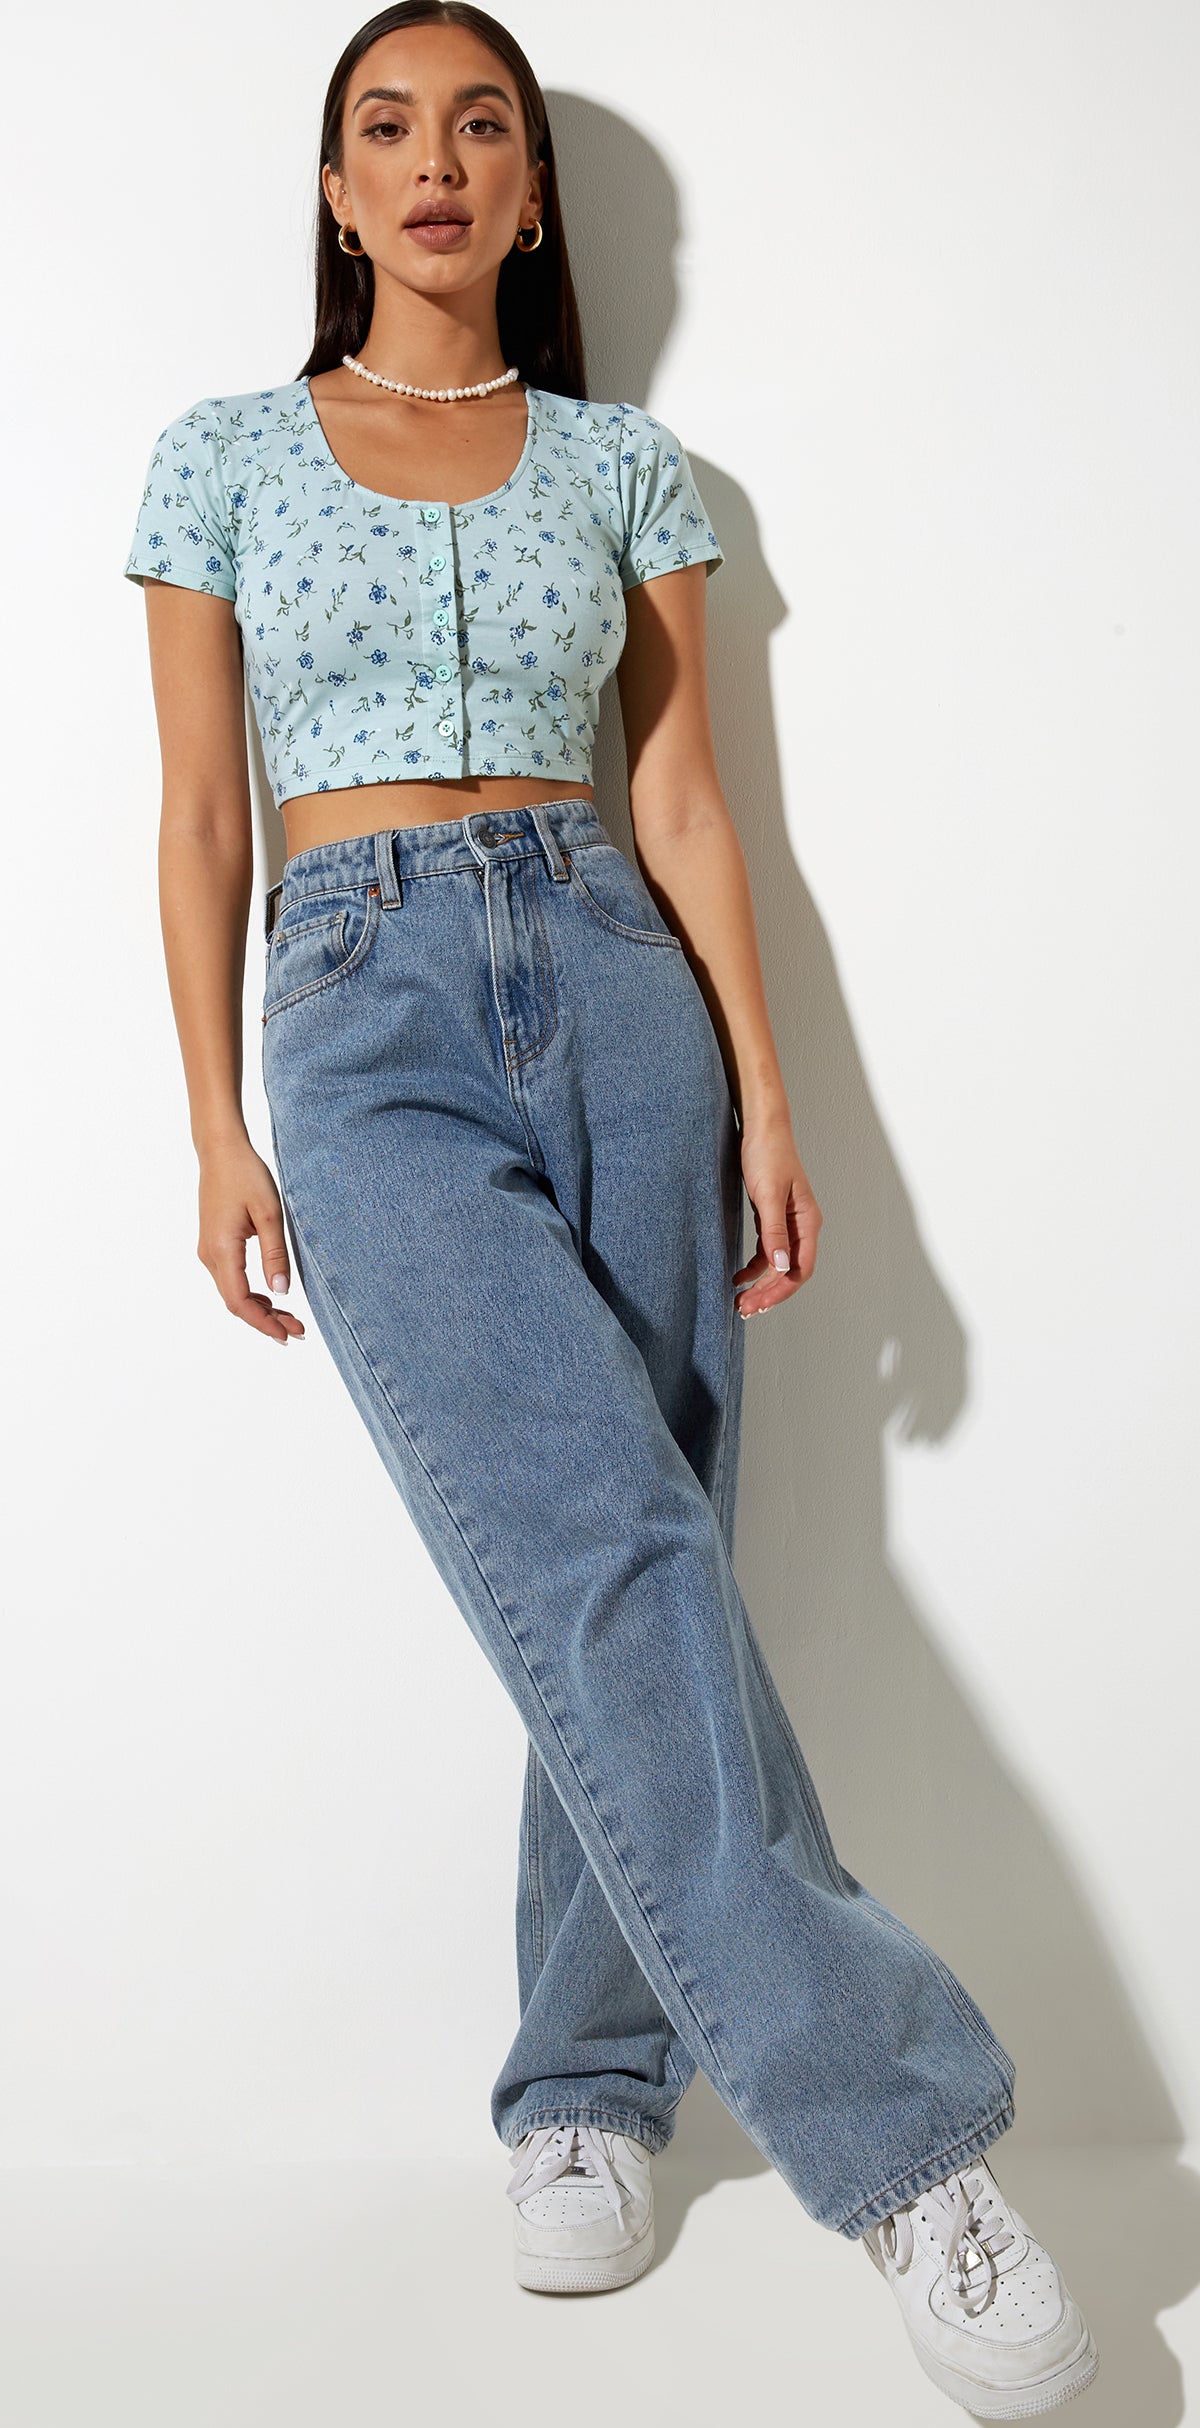 Short Sleeve Pastel Green Floral Print Button Up Crop Top | Mieye ...